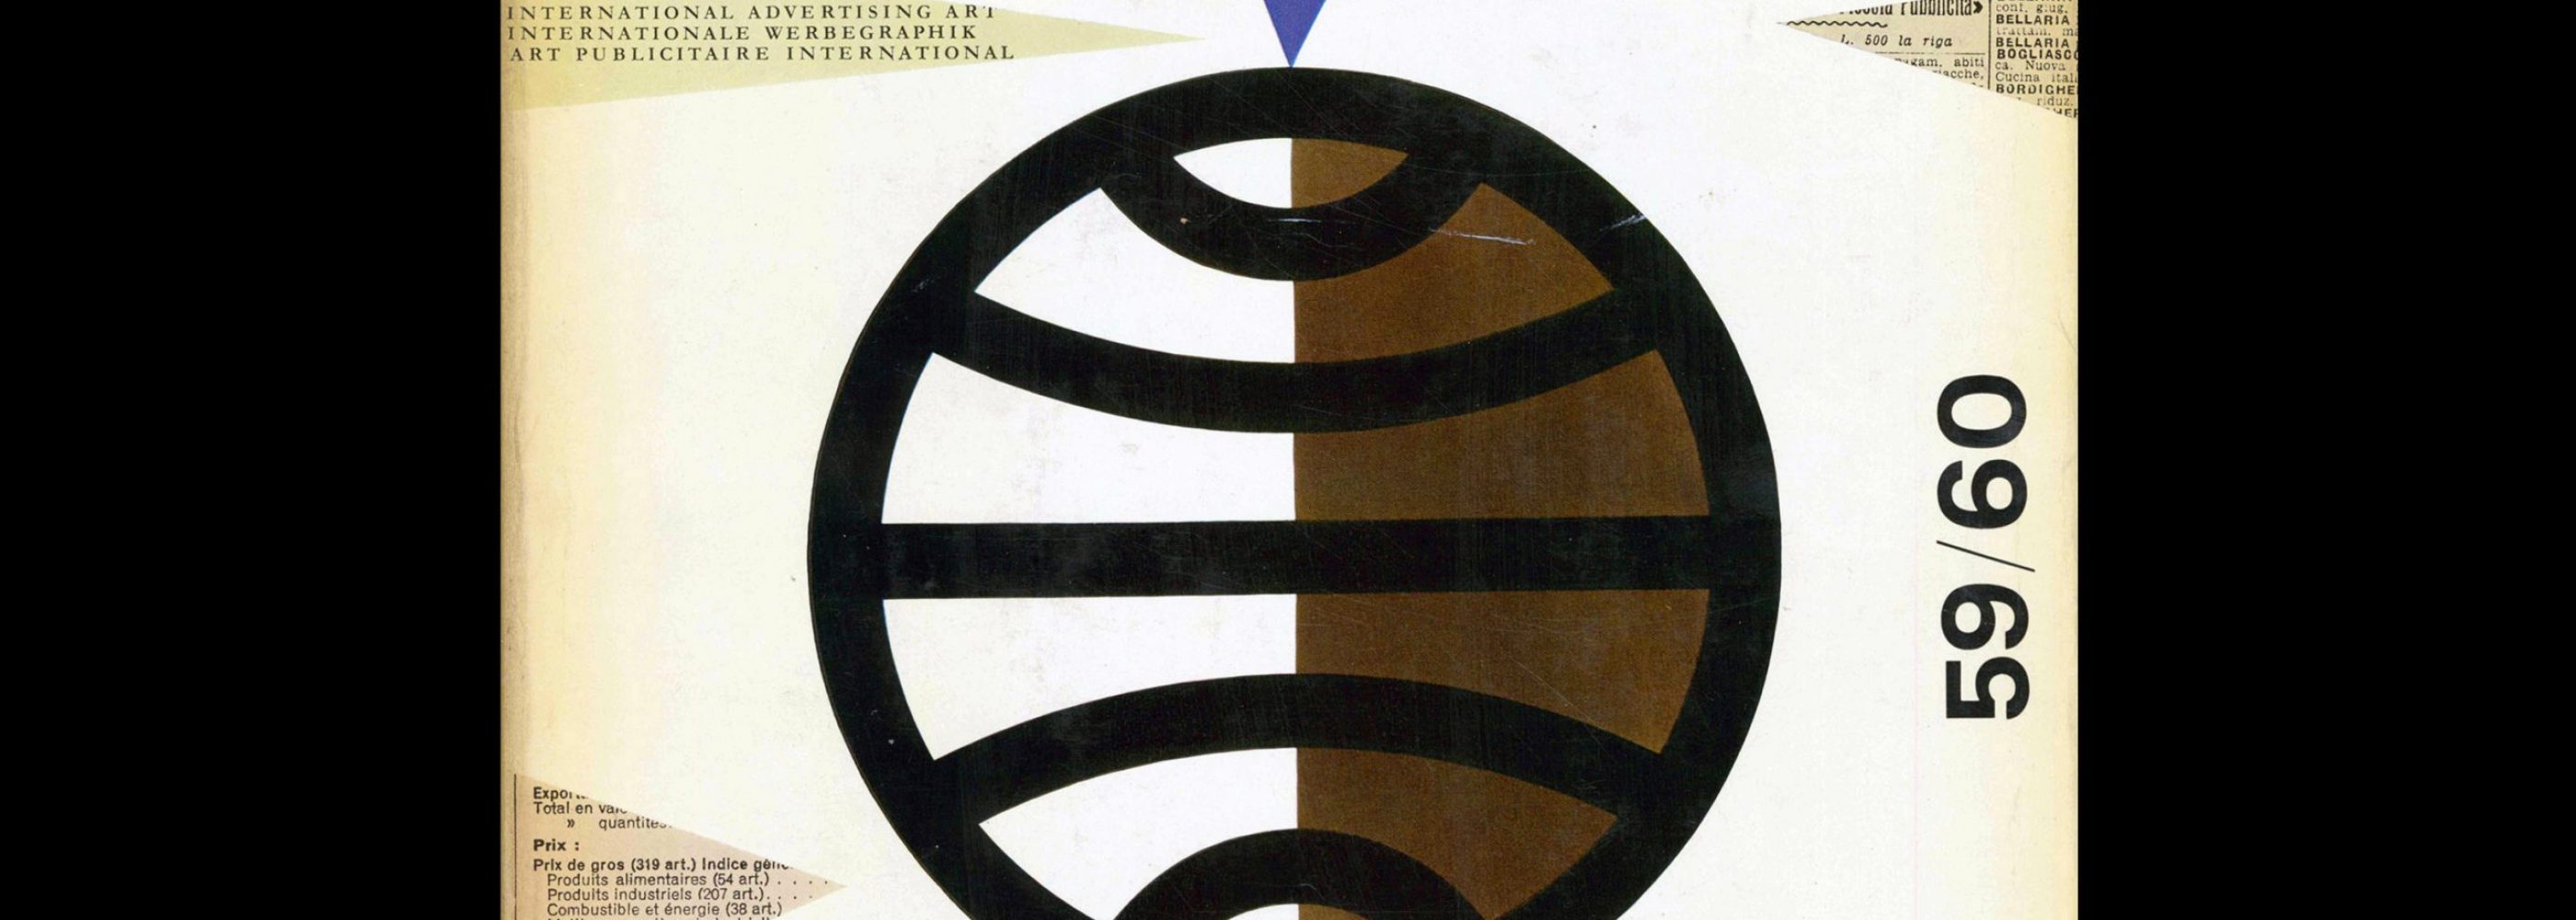 Graphis Annual 1959|60. Cover design by George Giusti